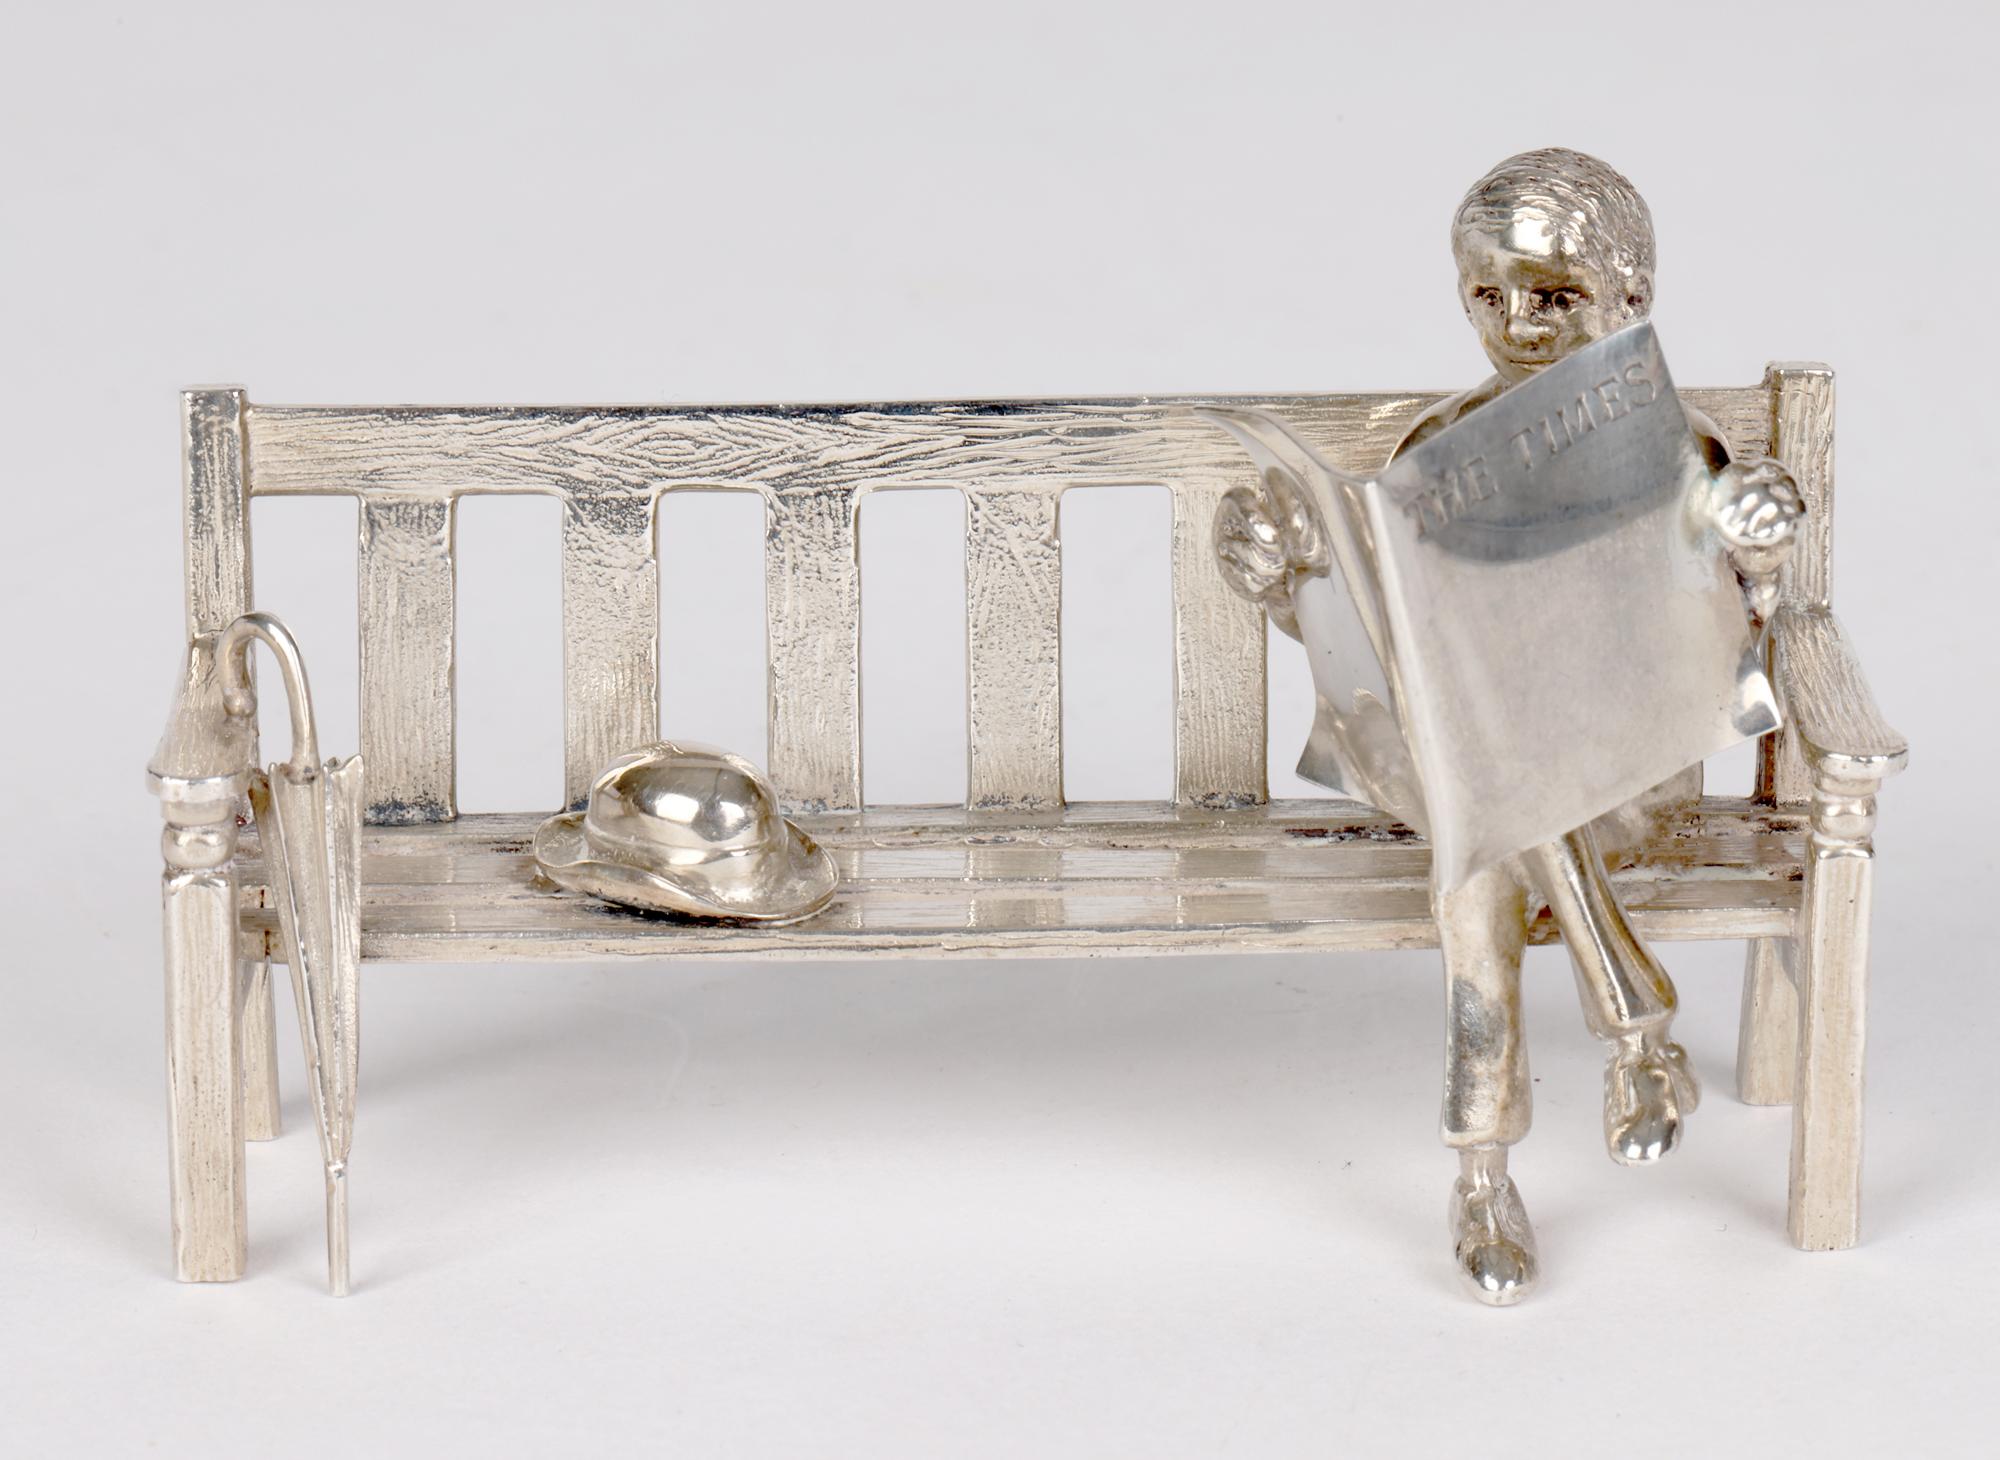 Hand-Crafted Sarah Jones the Times Silver Novelty Figure Sat on a Park Bench